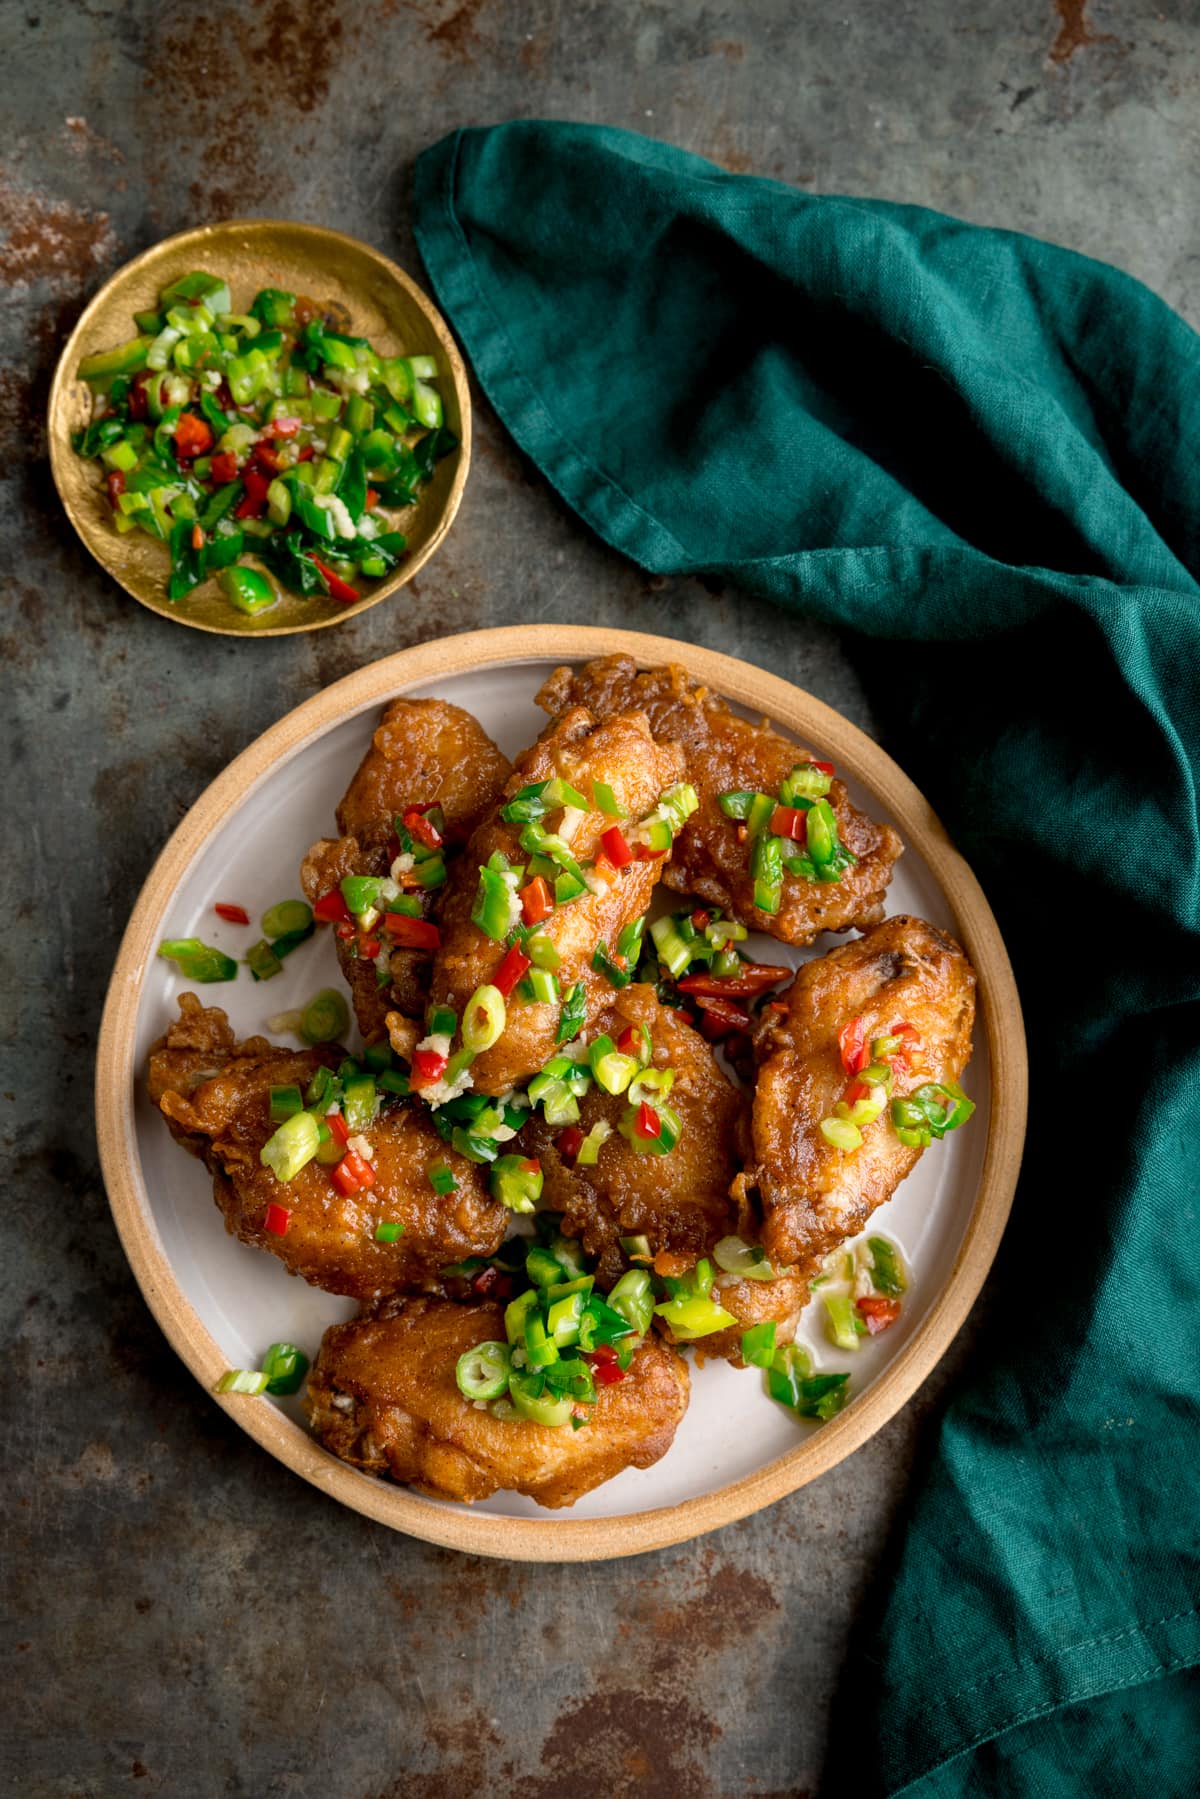 Overhead image of crispy salt and pepper chicken wings on a white plate on a rustic metal surface. There is a green napkin and a small gold dish with some of the chilli-salt-pepper topping in it.